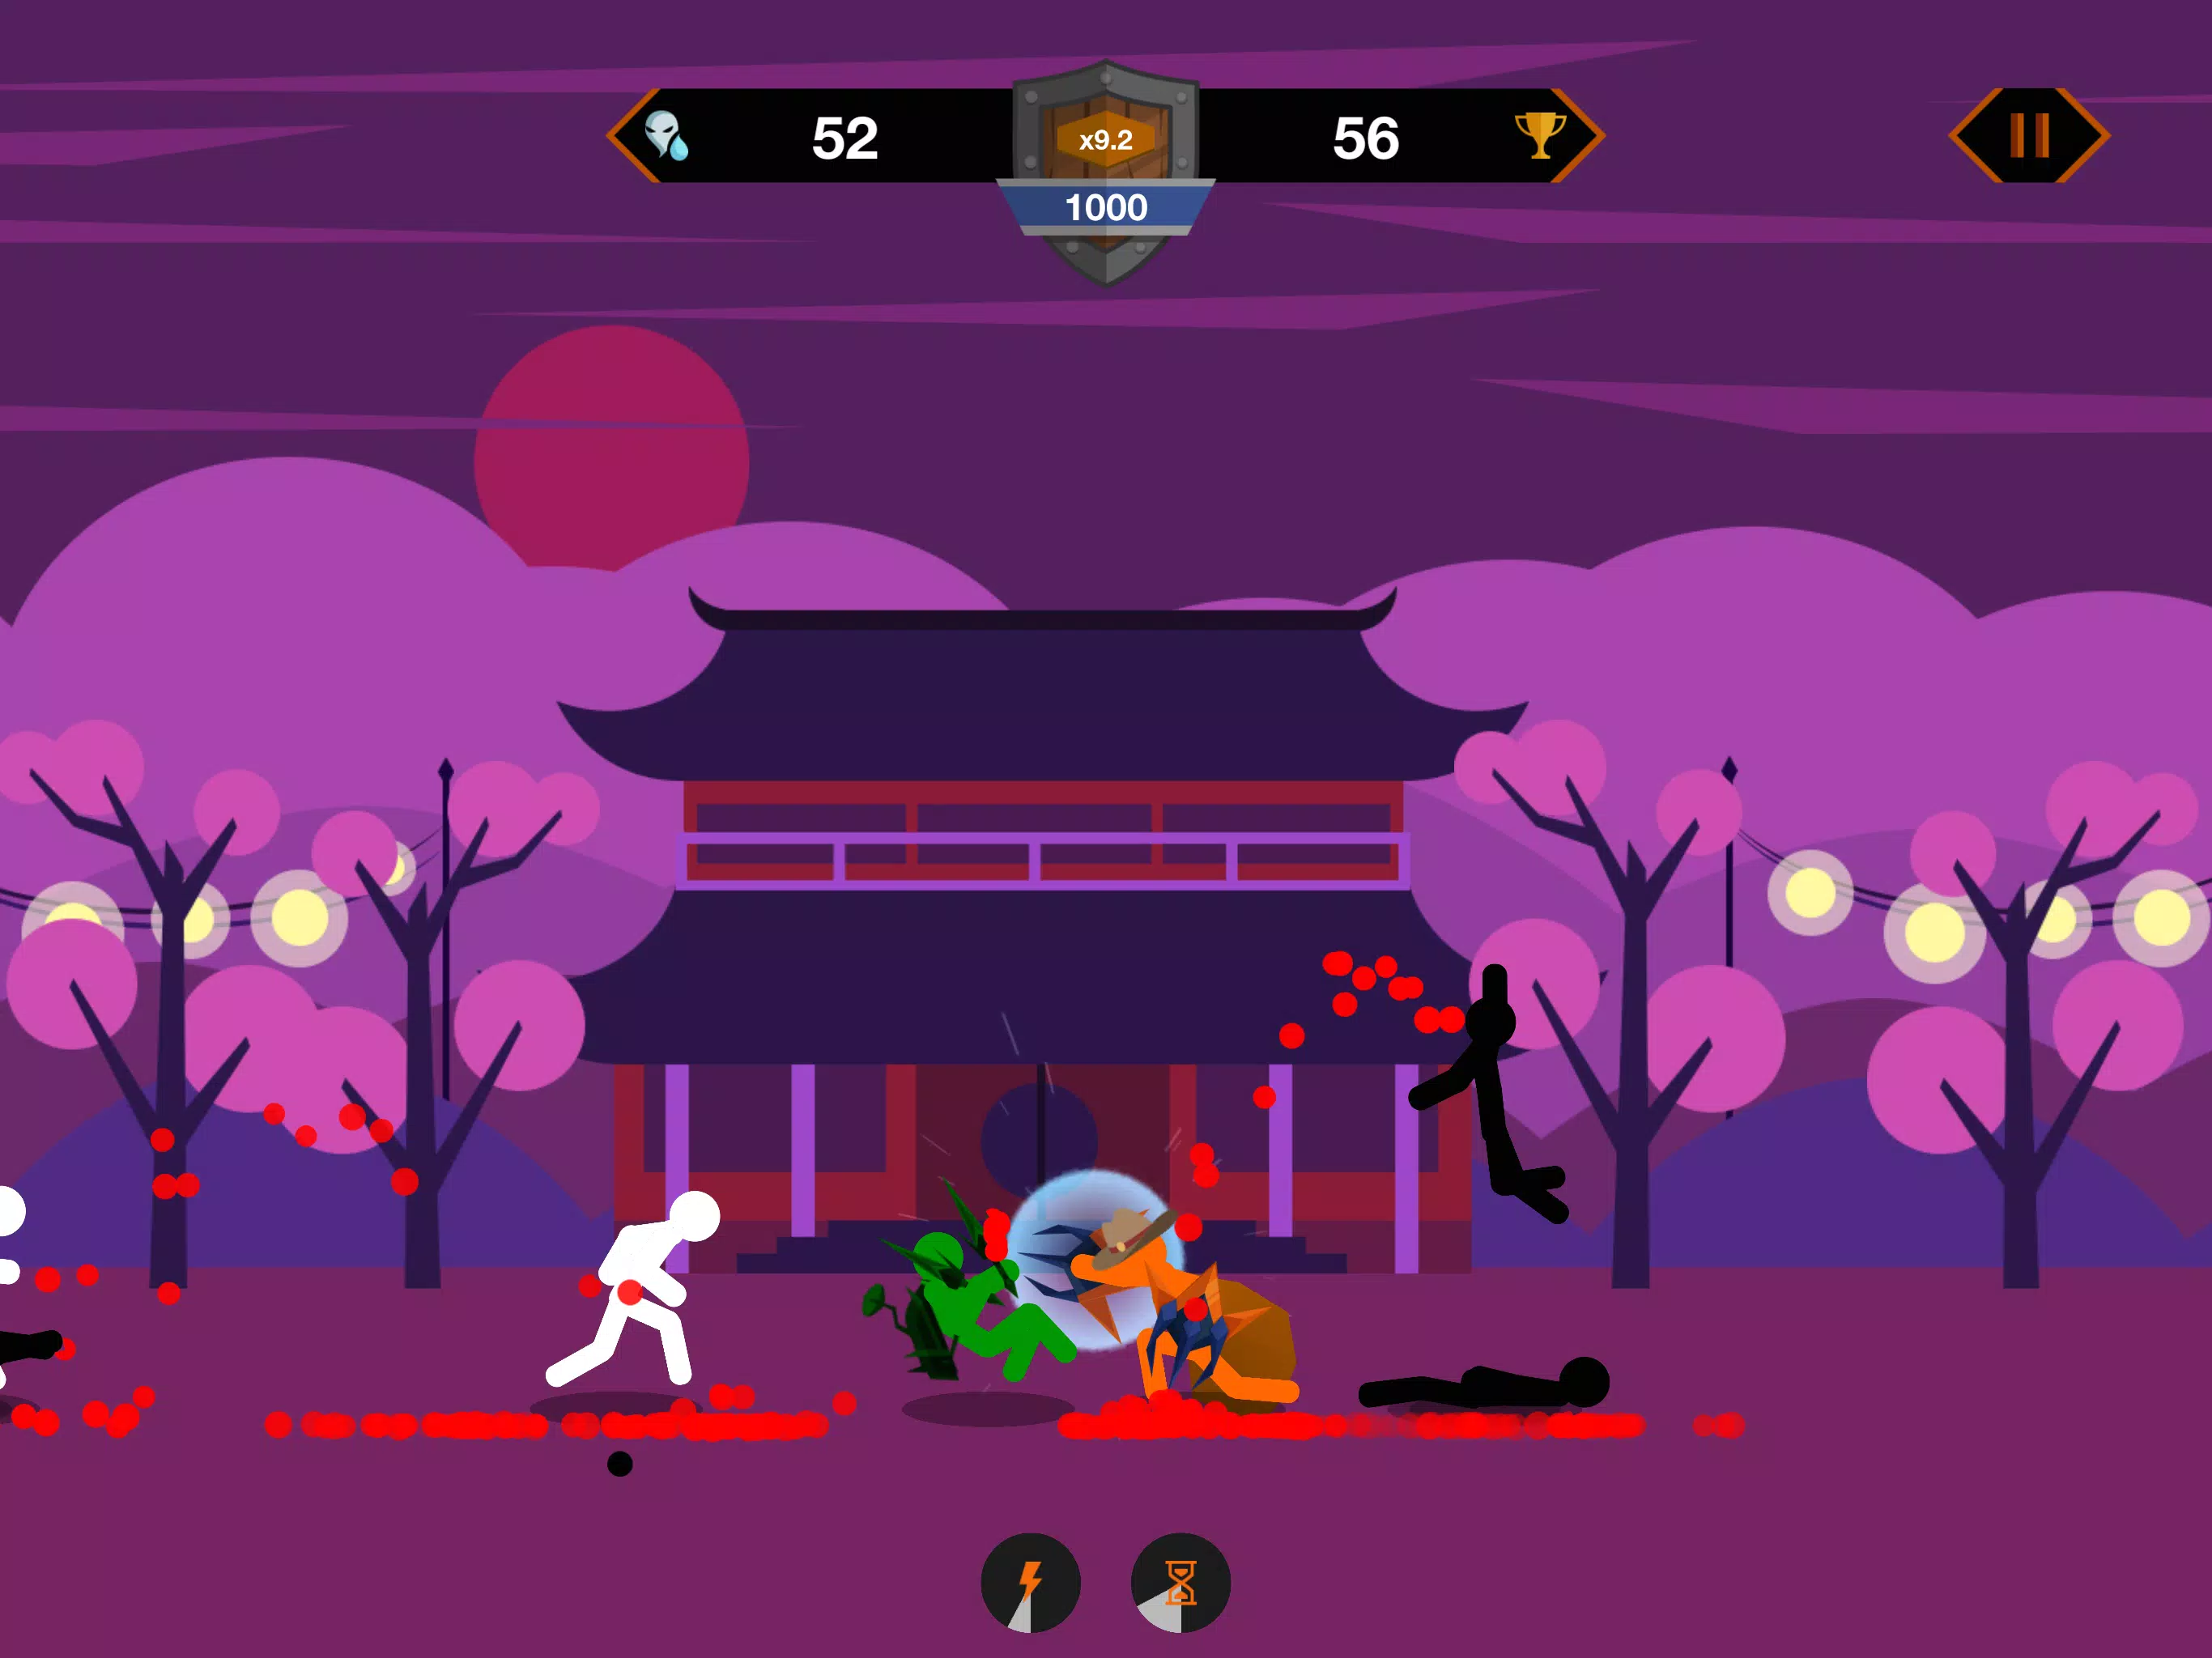 Stick Fight 2 for Android - APK Download